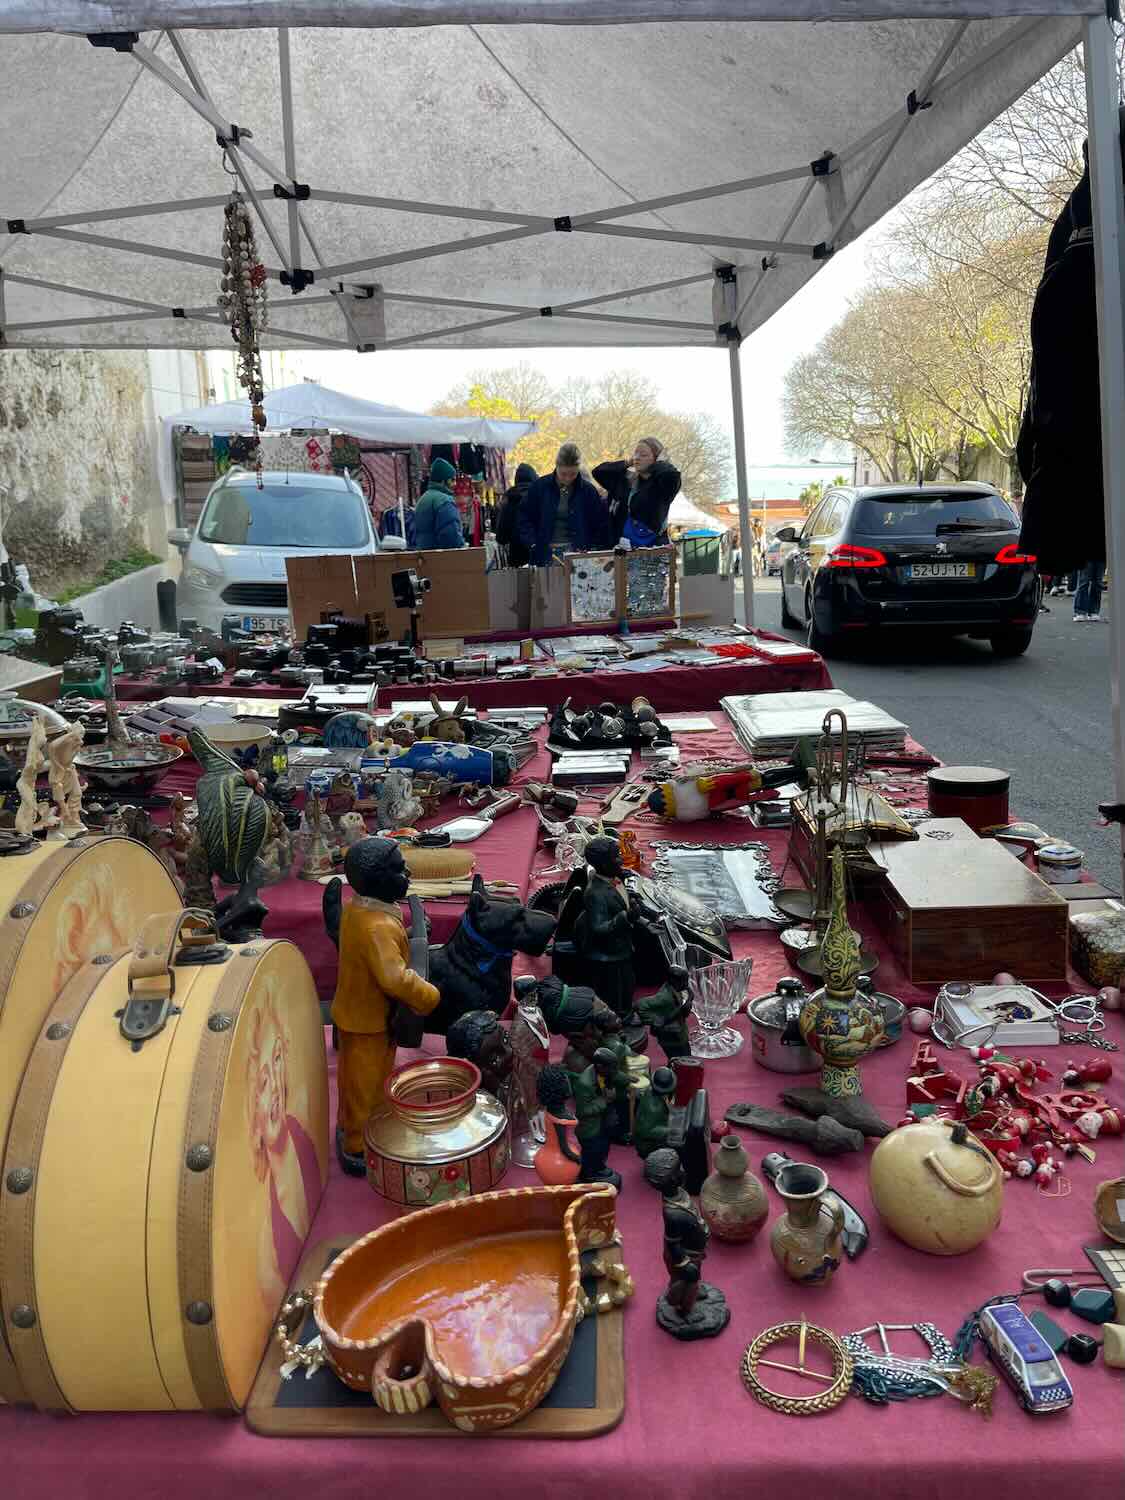 ssorted antiques and collectibles displayed at a Lisbon flea market, showcasing the city's vibrant weekend shopping and street culture.